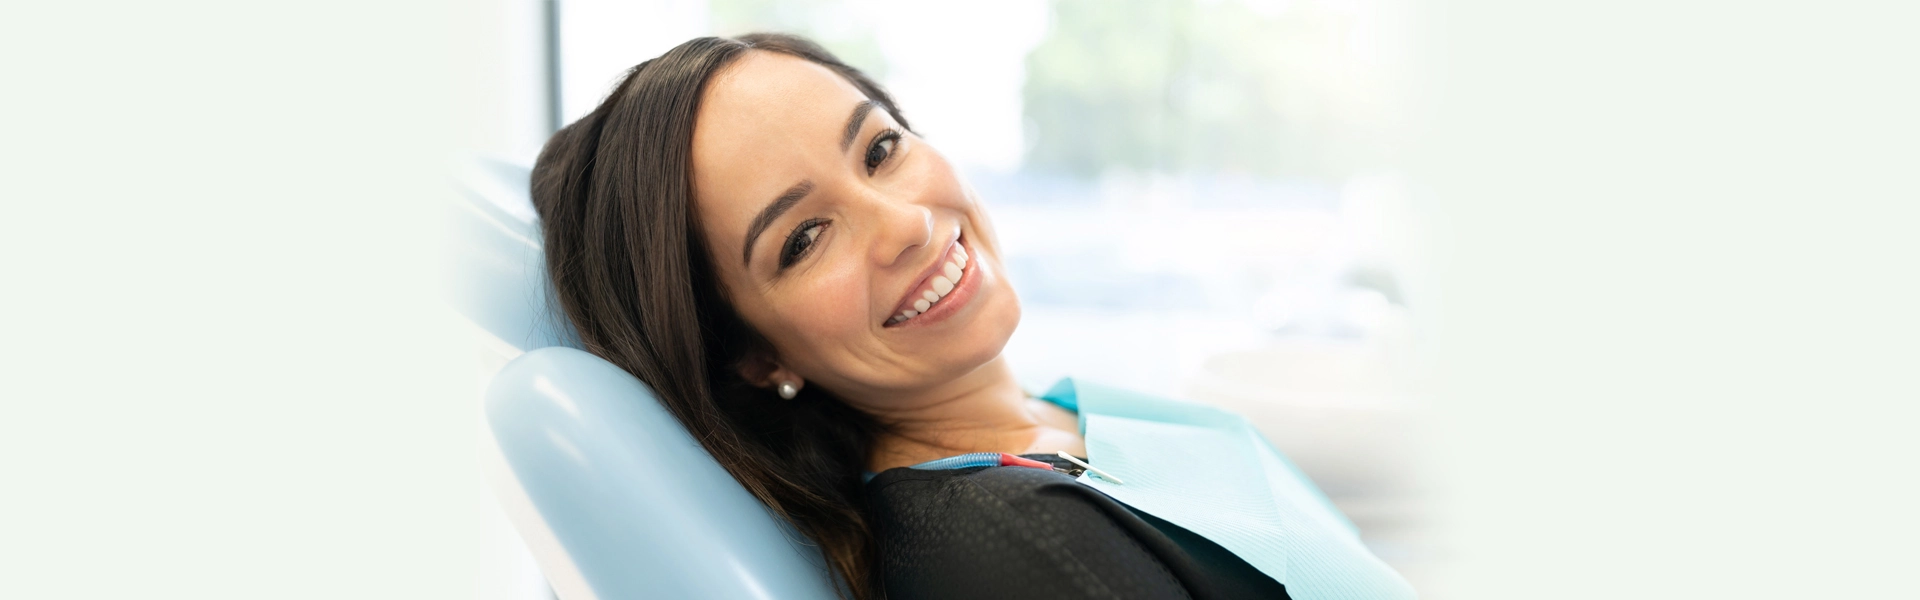 Same-Day Crowns vs. Traditional Crowns: Which One is Best for You?